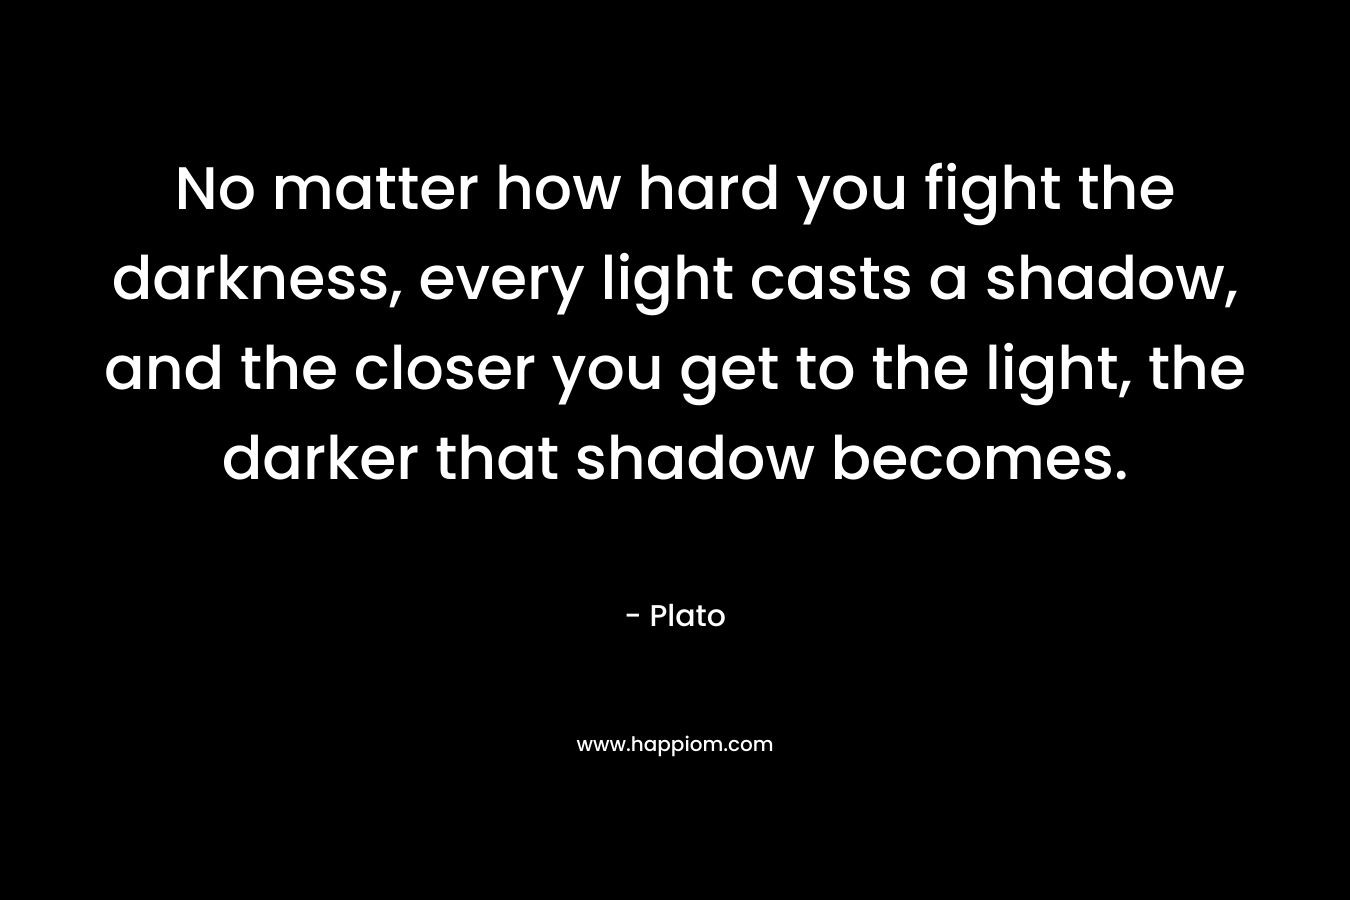 No matter how hard you fight the darkness, every light casts a shadow, and the closer you get to the light, the darker that shadow becomes. – Plato